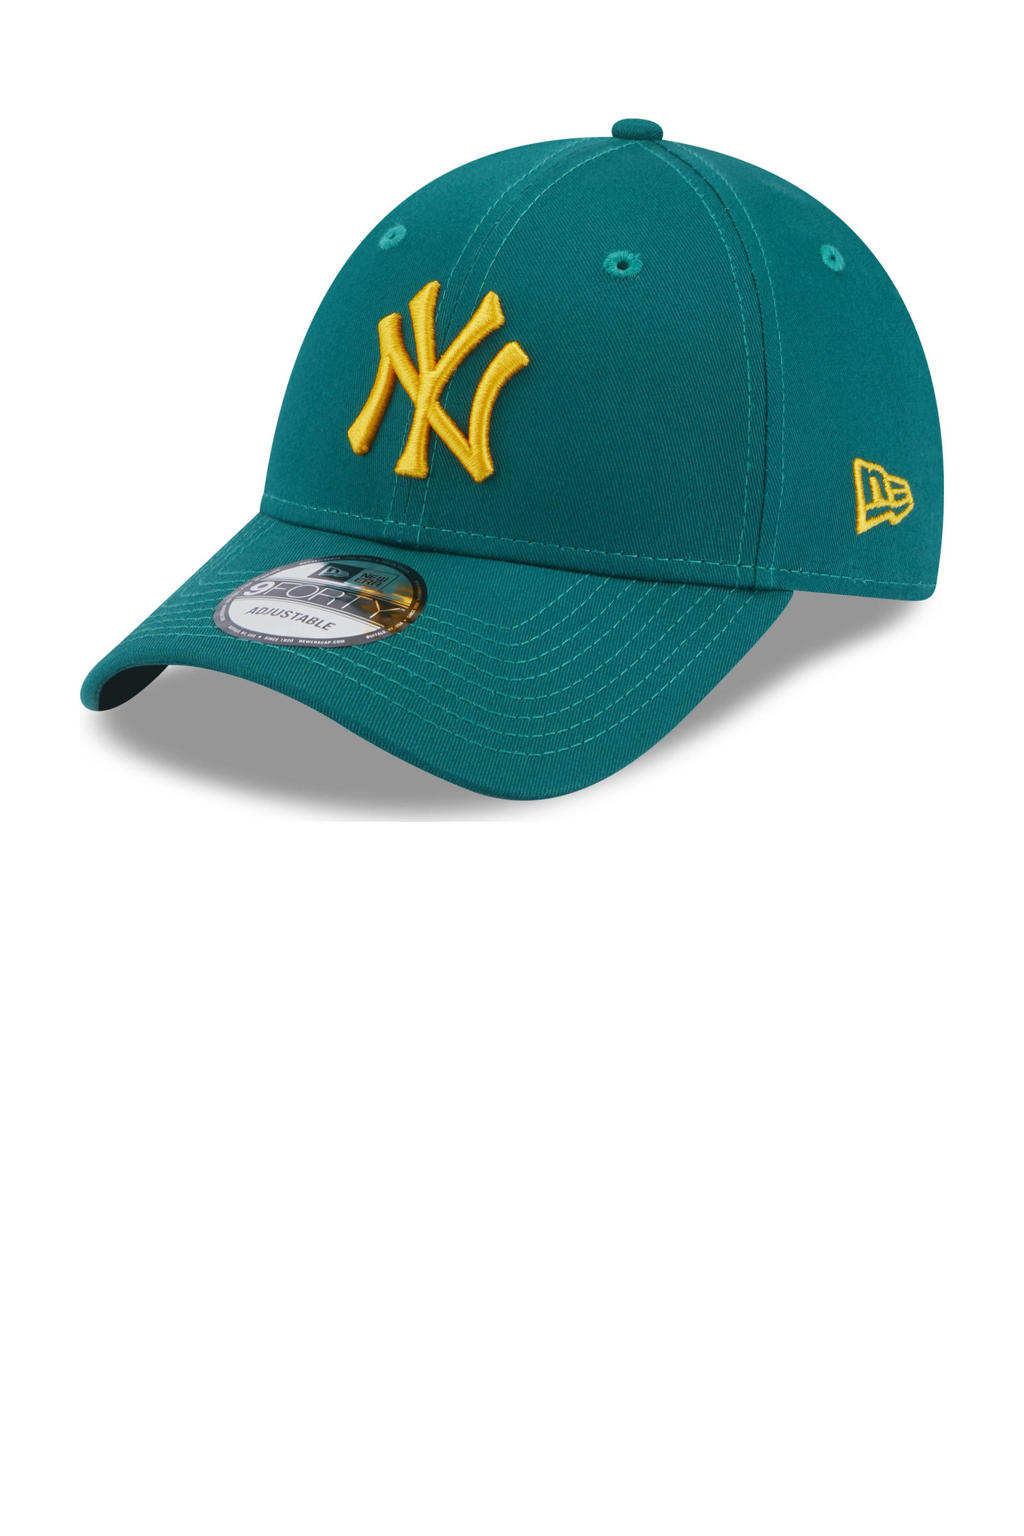 New Era 9Forty NY pet turquois/geel